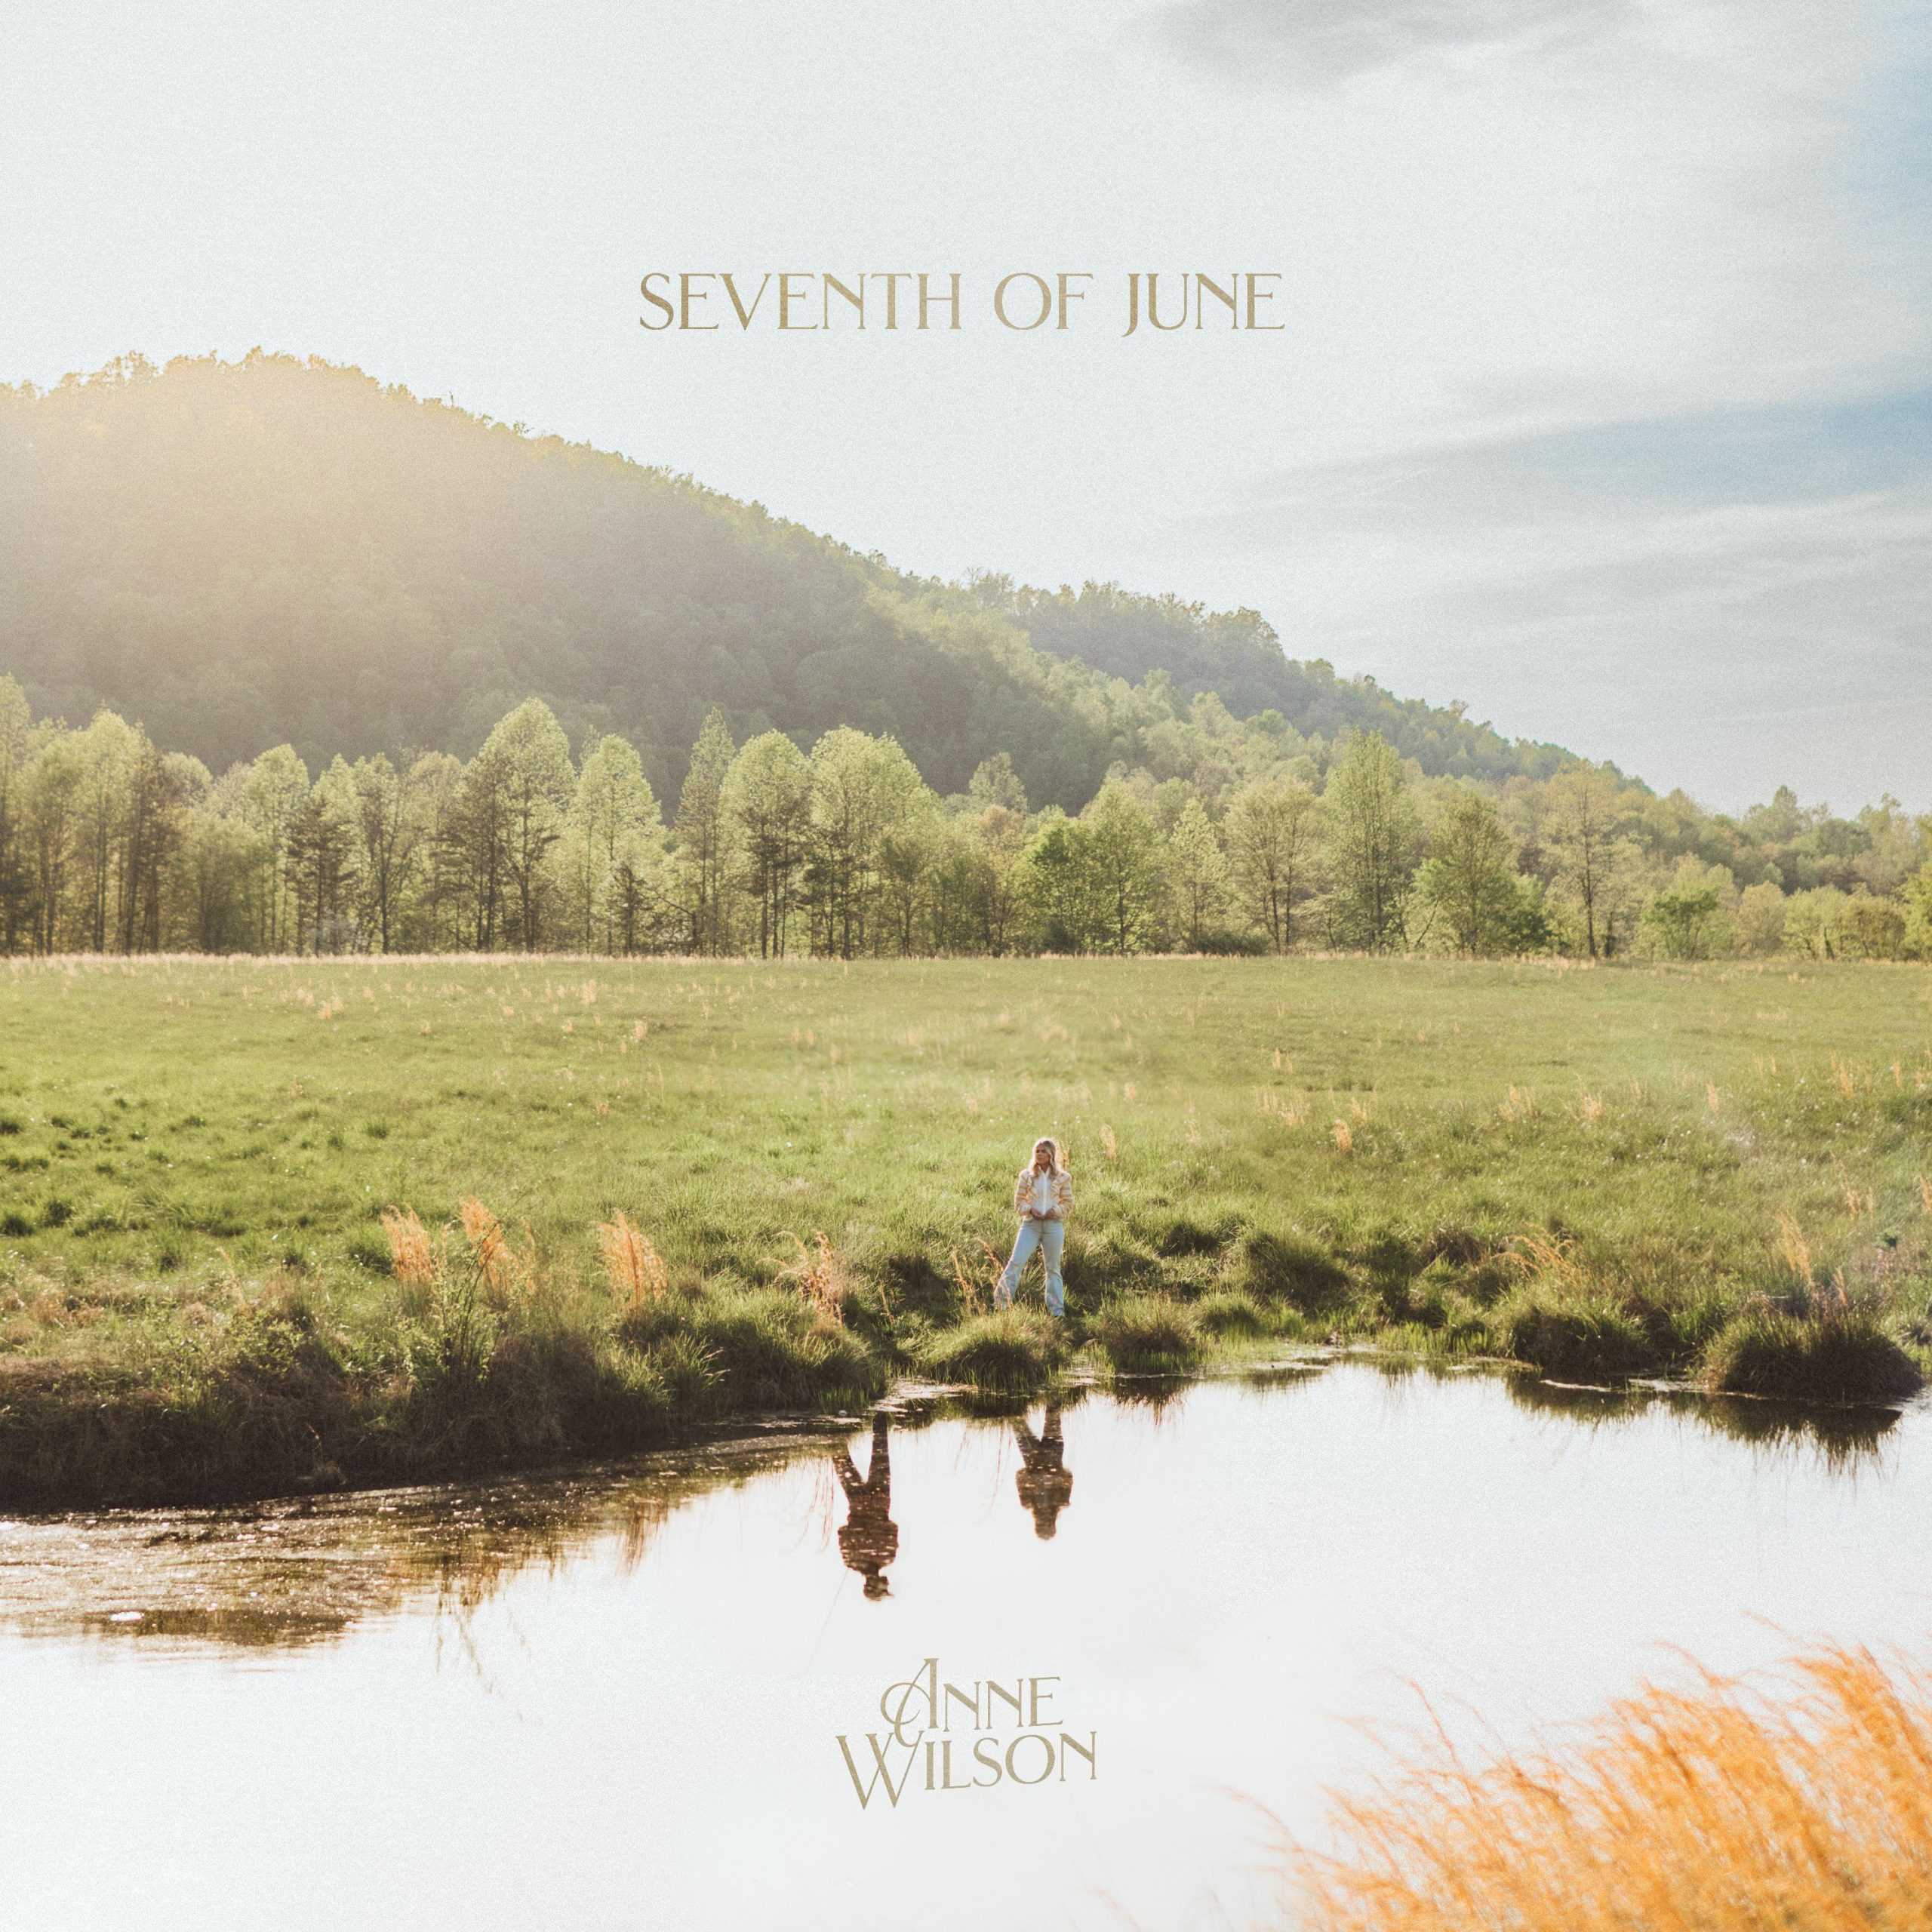 ANNE WILSON UNVEILS HEART-WRENCHING TRIBUTE “SEVENTH OF JUNE” REFLECTING ON PERSONAL JOURNEY OF LOSS AND FAITH